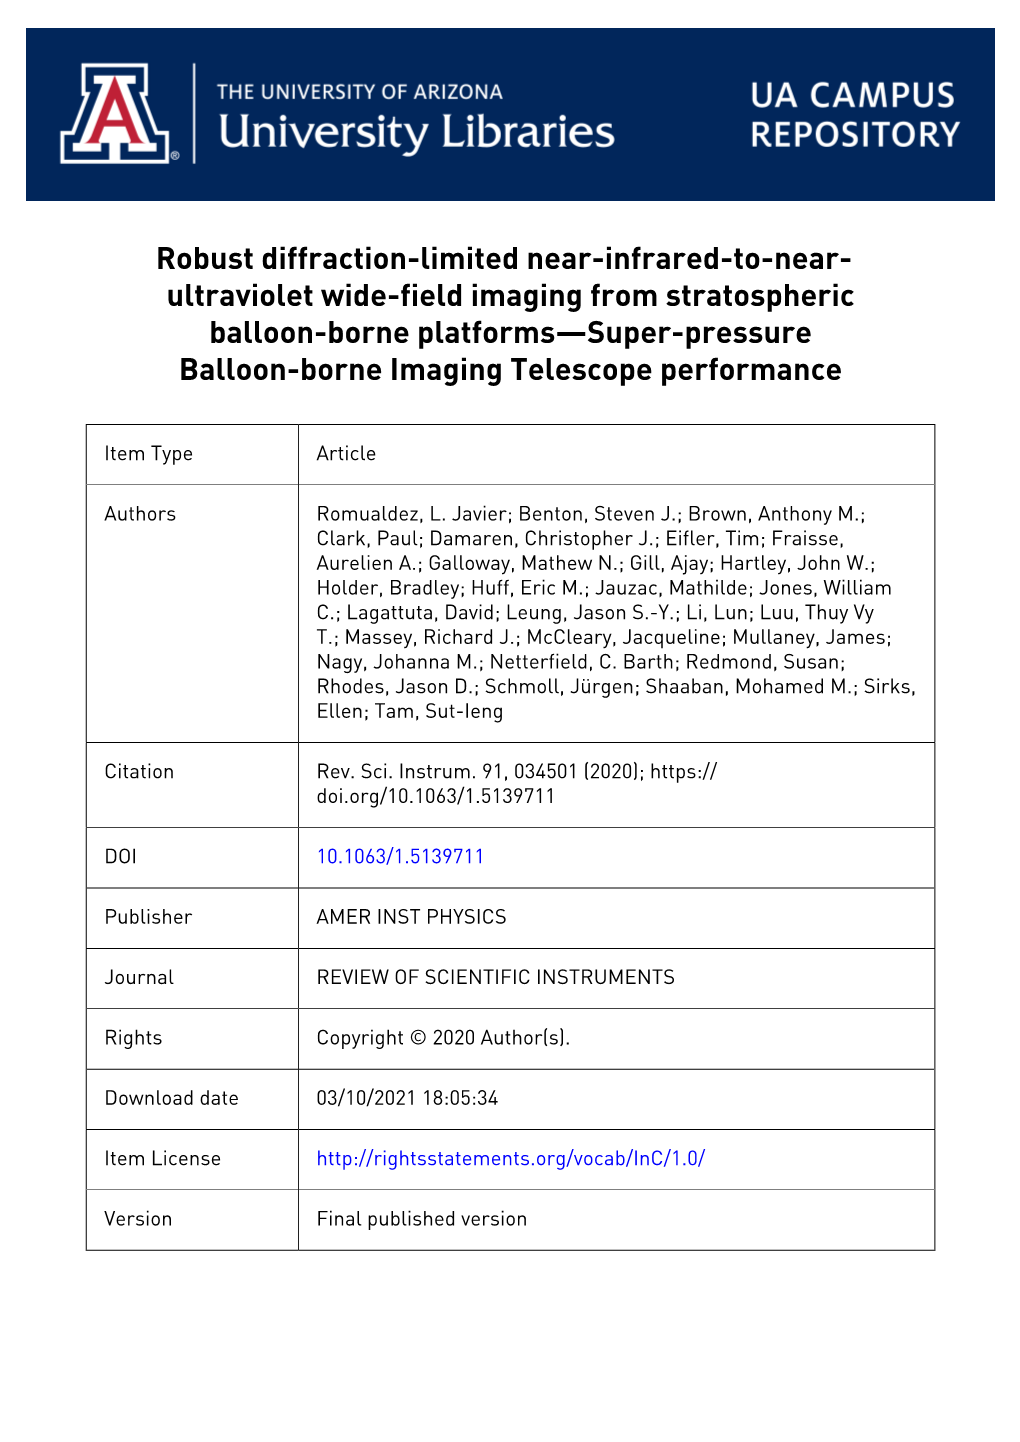 Robust Diffraction-Limited Near-Infrared-To-Near-Ultraviolet Wide-Field Imaging from Stratospheric Balloon-Borne Platforms—Sup